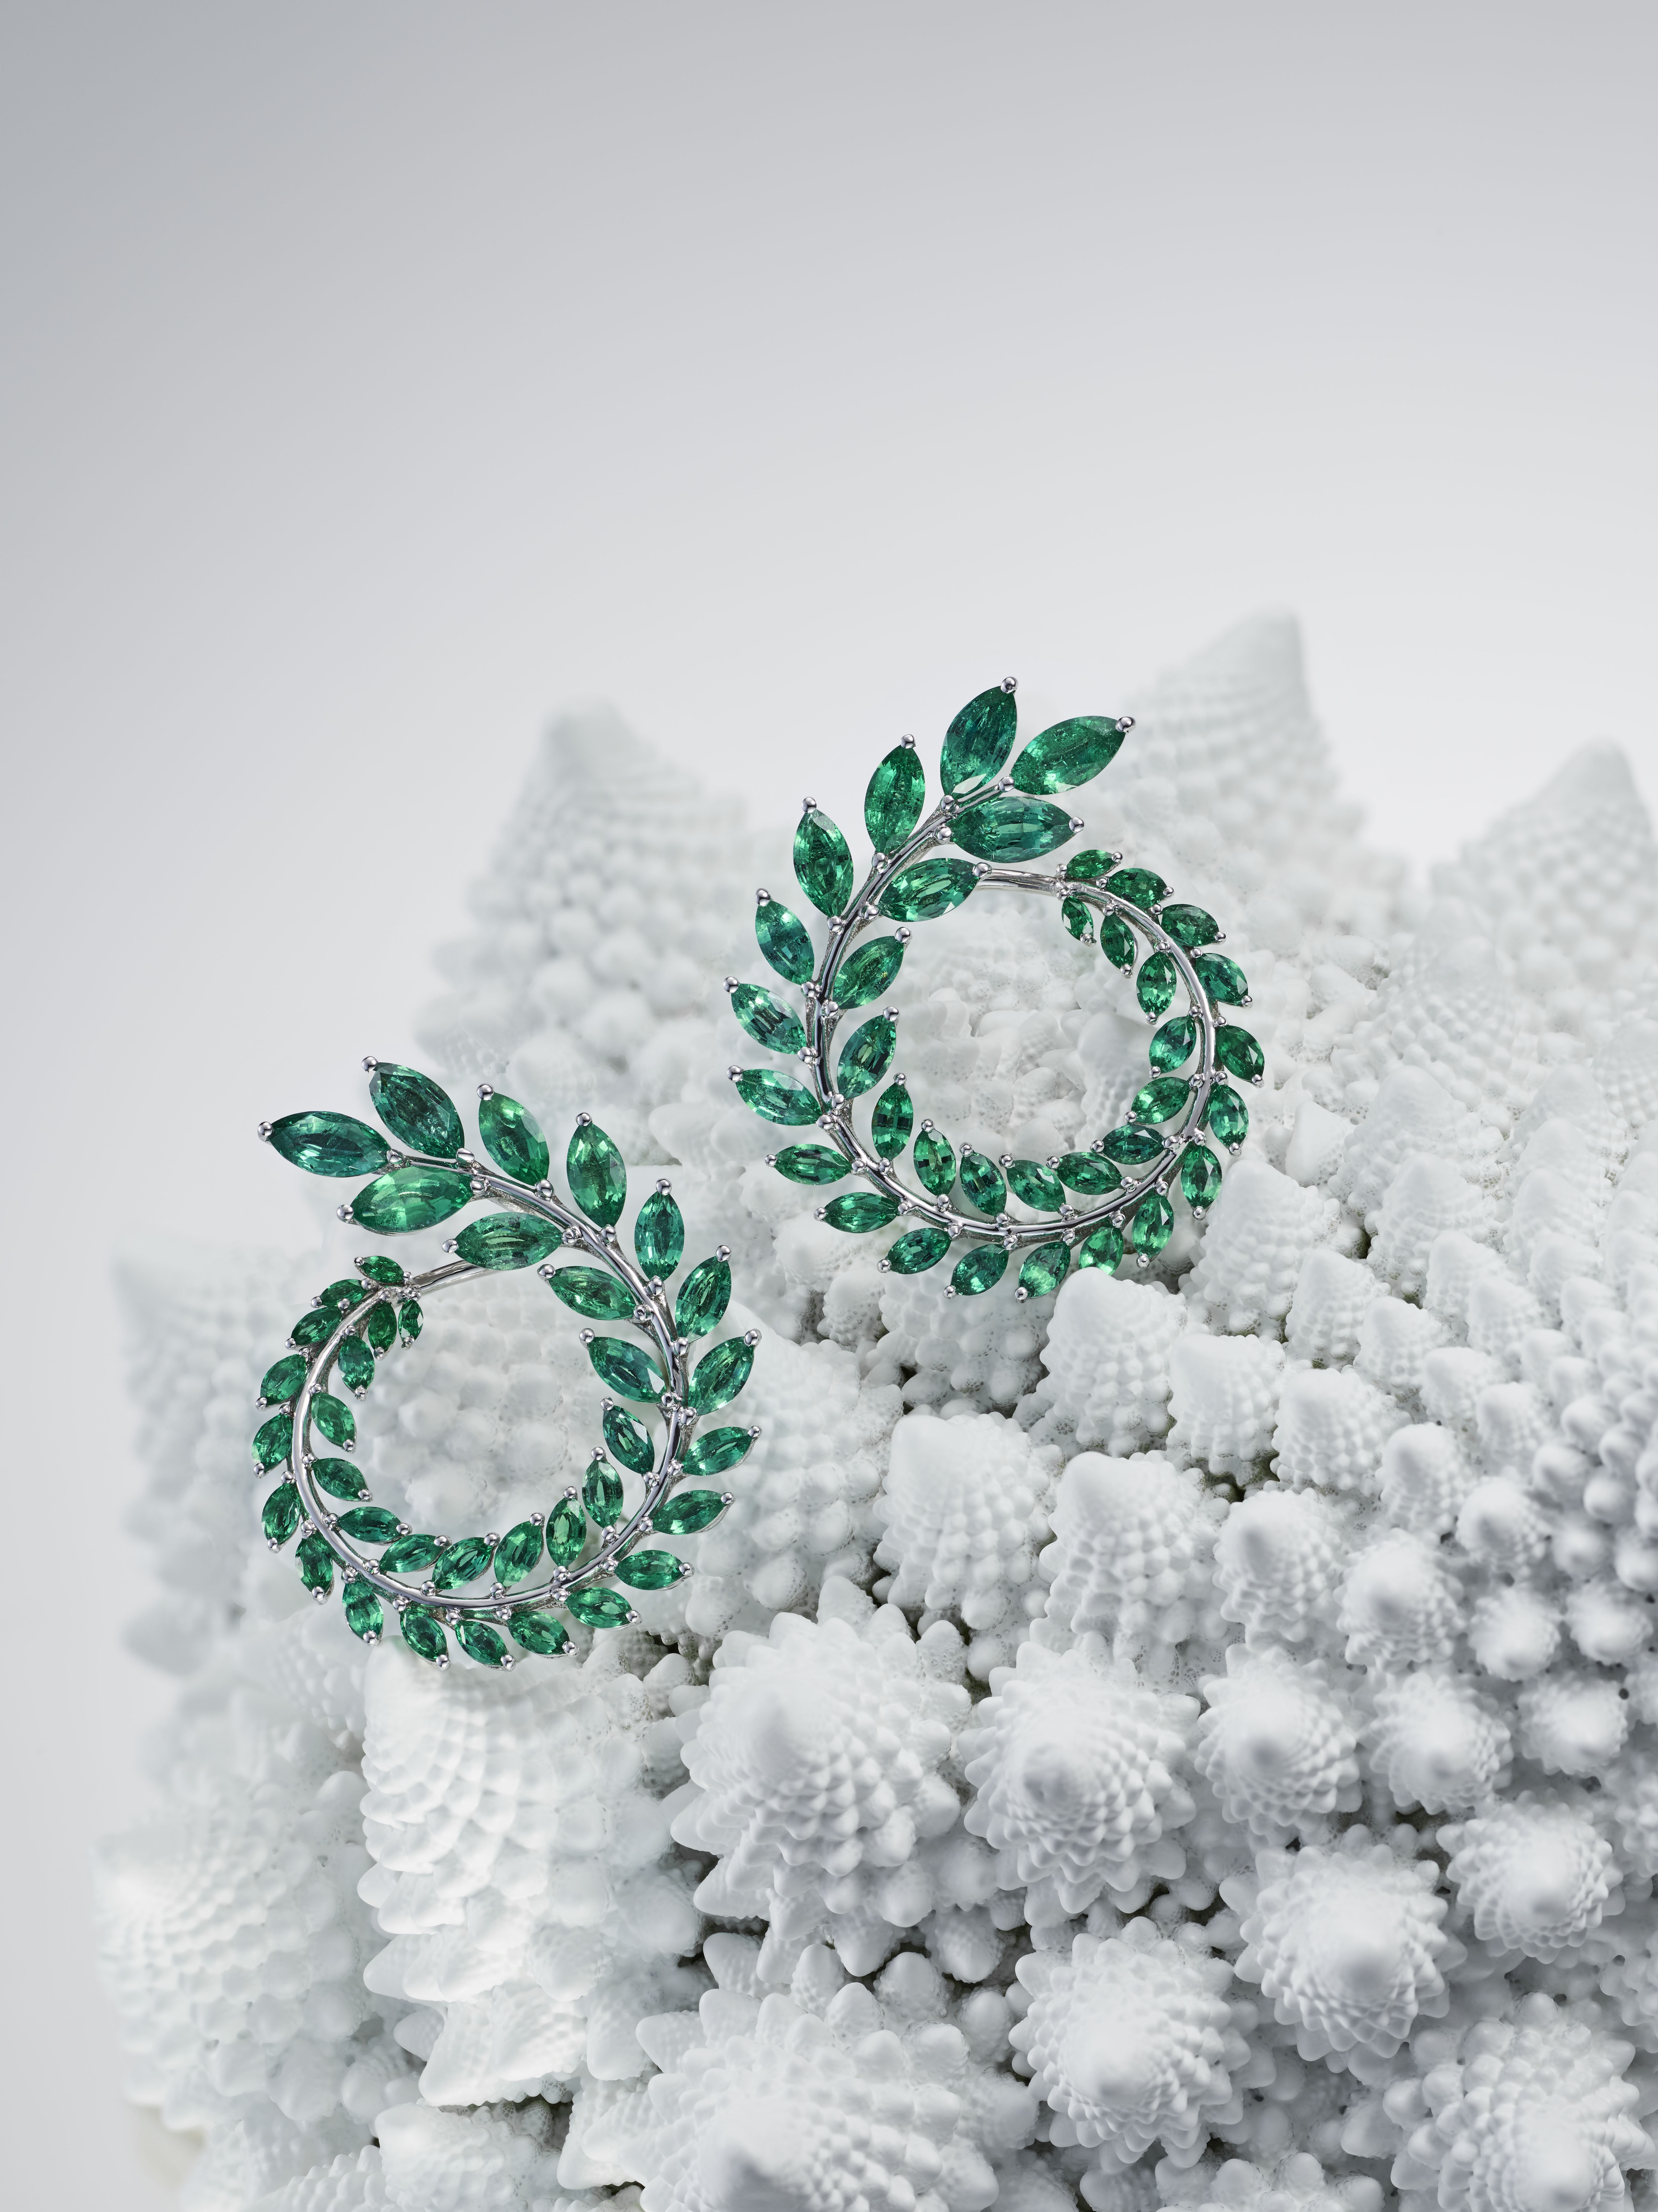 Chopard earrings made with 18ct white Fairmined gold set with ethically sourced marquise-cut emeralds from Gemfields' Kagem mine in Zambia.